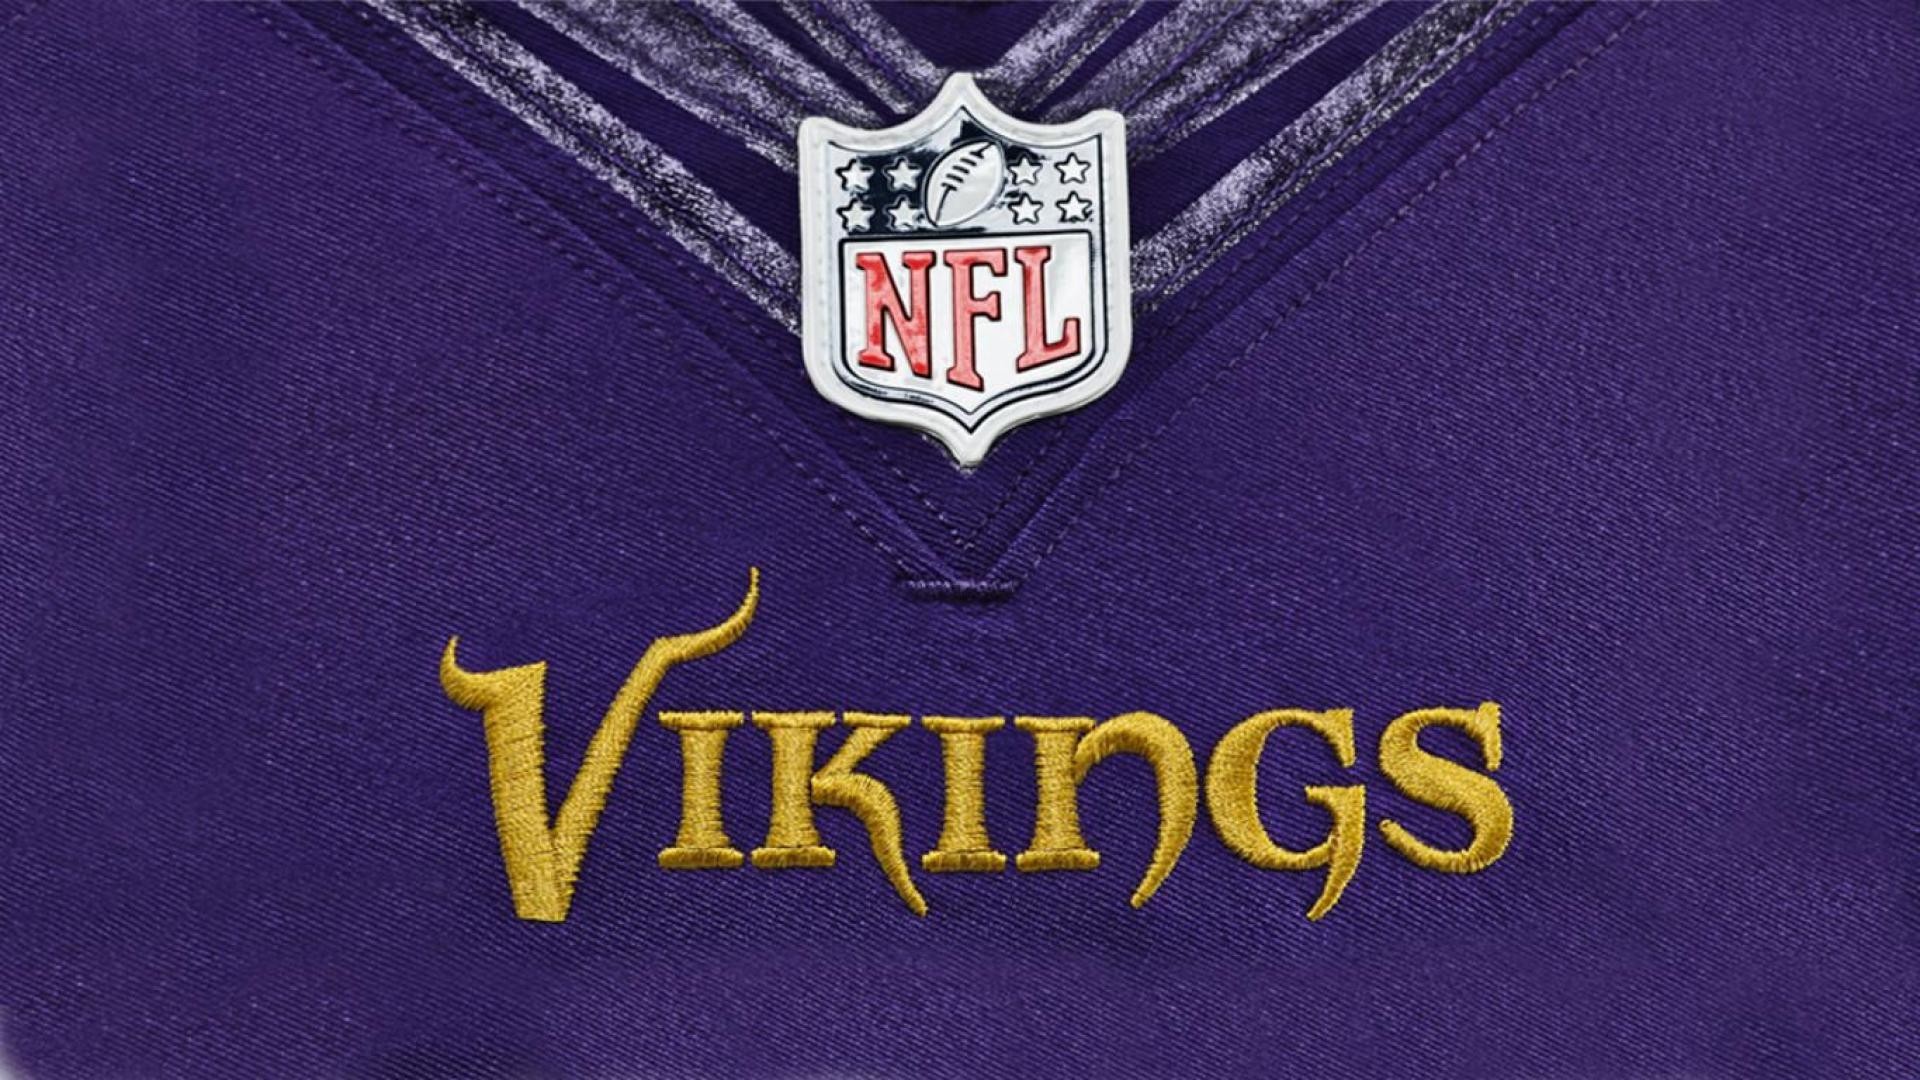 Minnesota Vikings Mac Backgrounds with resolution 1920x1080 pixel. You can make this wallpaper for your Mac or Windows Desktop Background, iPhone, Android or Tablet and another Smartphone device